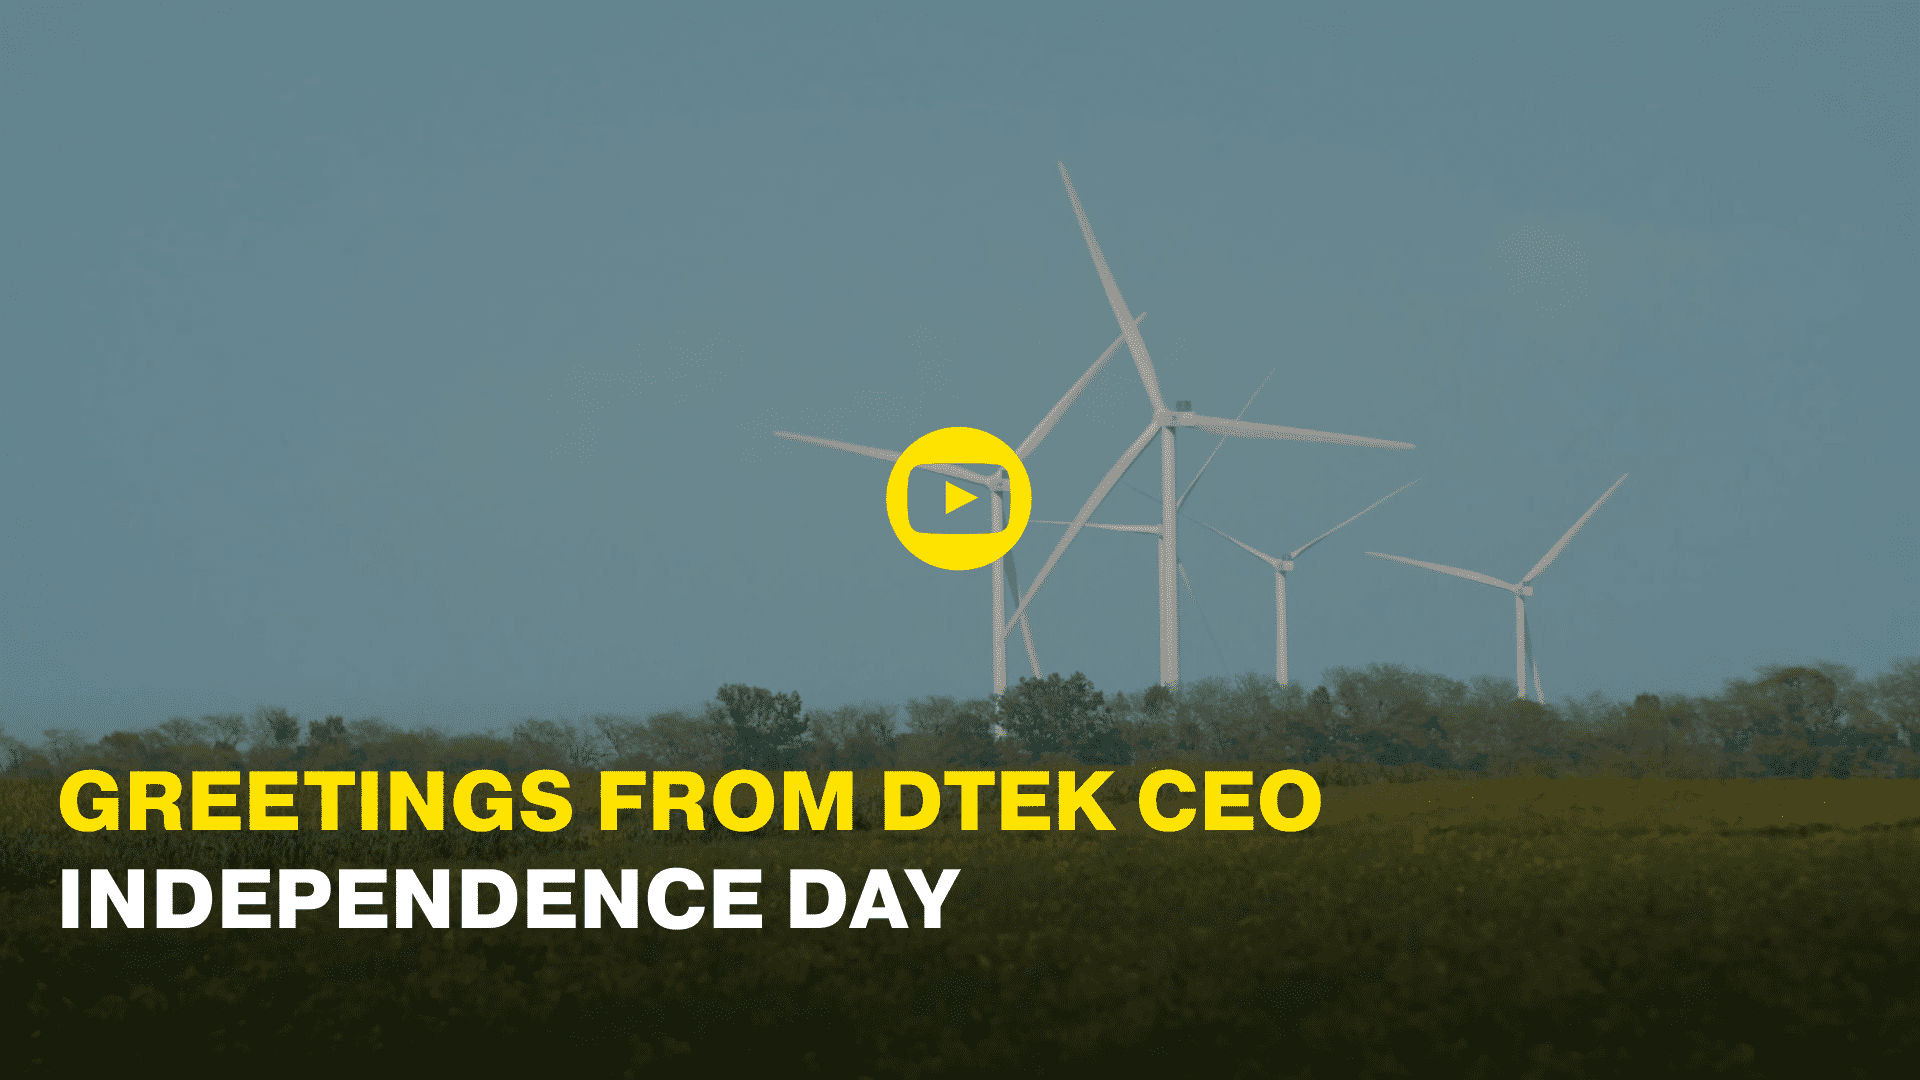 Greetings from DTEK CEO INDEPENDENCE DAY